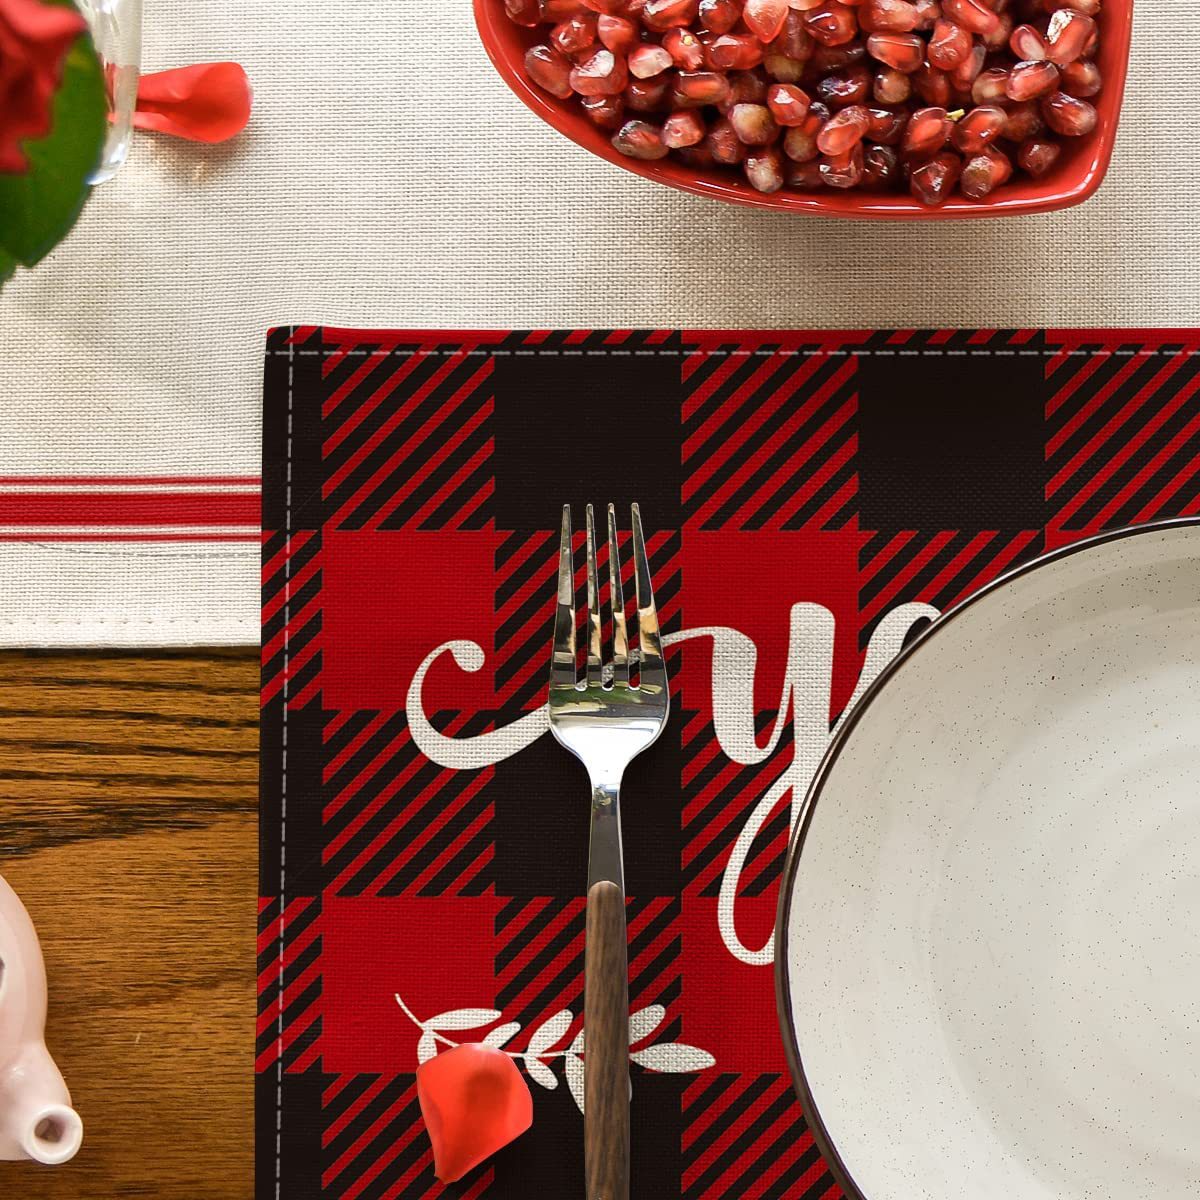 New Valentine's Day Placemat Red Plaid Table Mat Linen Tablecloth Amazon Kitchen Tea Towel Cloth Western Restaurant Decoration